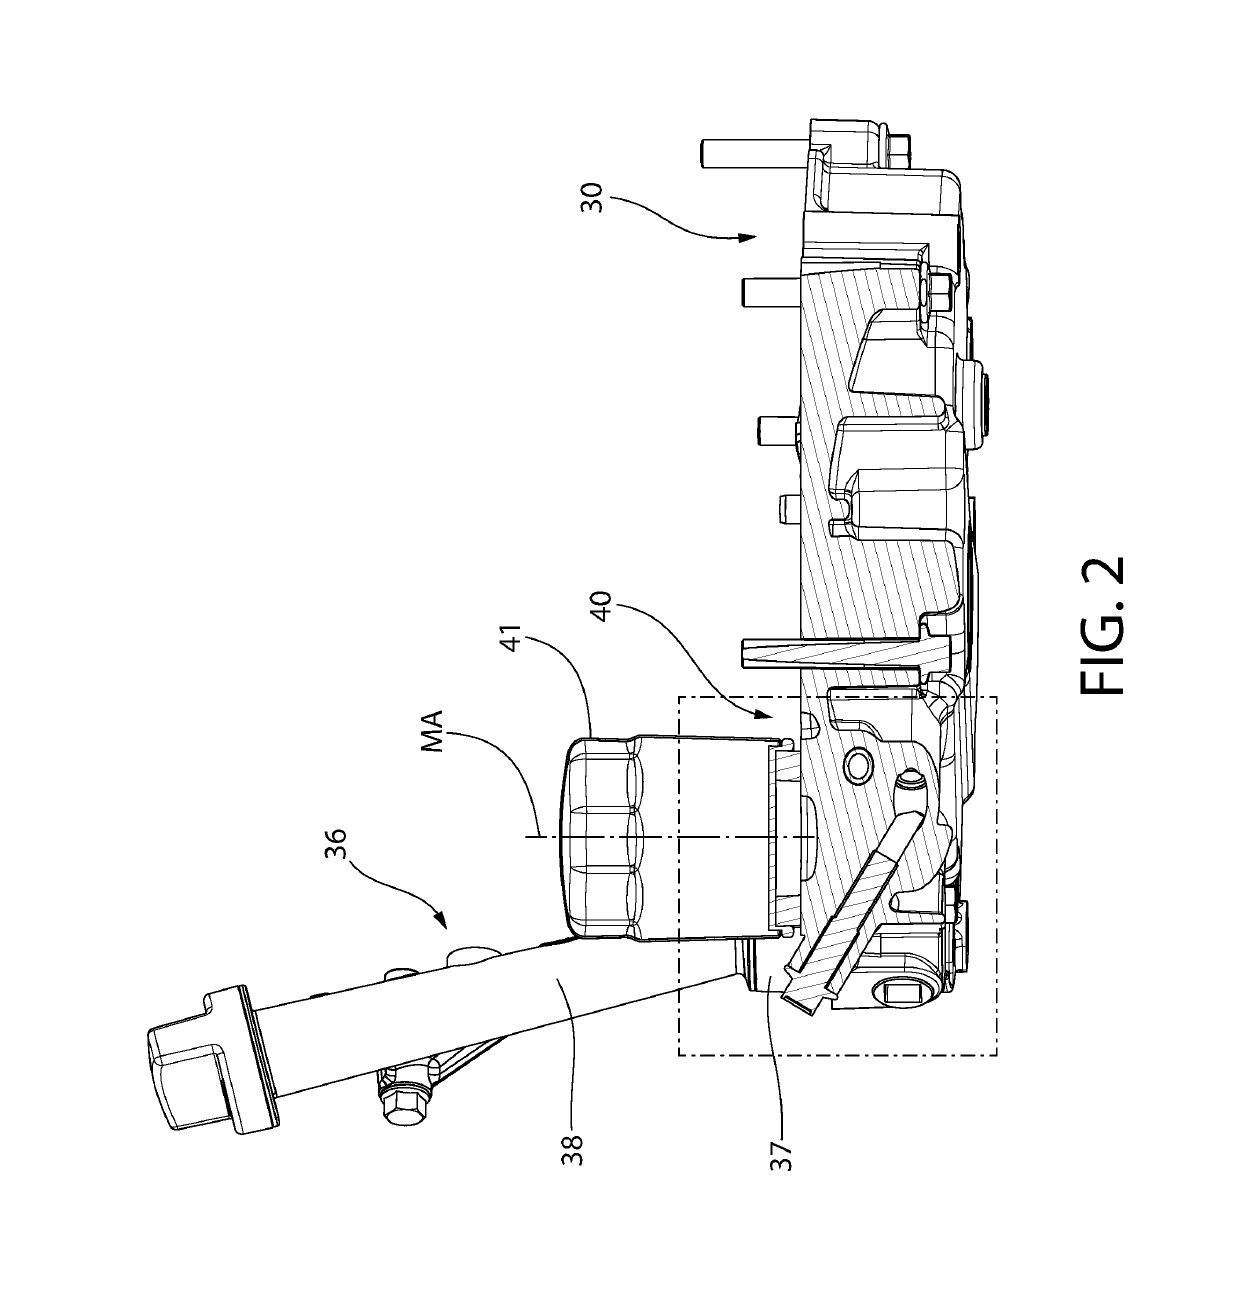 Residual oil drainage system and related method for replacing an oil filter of an engine